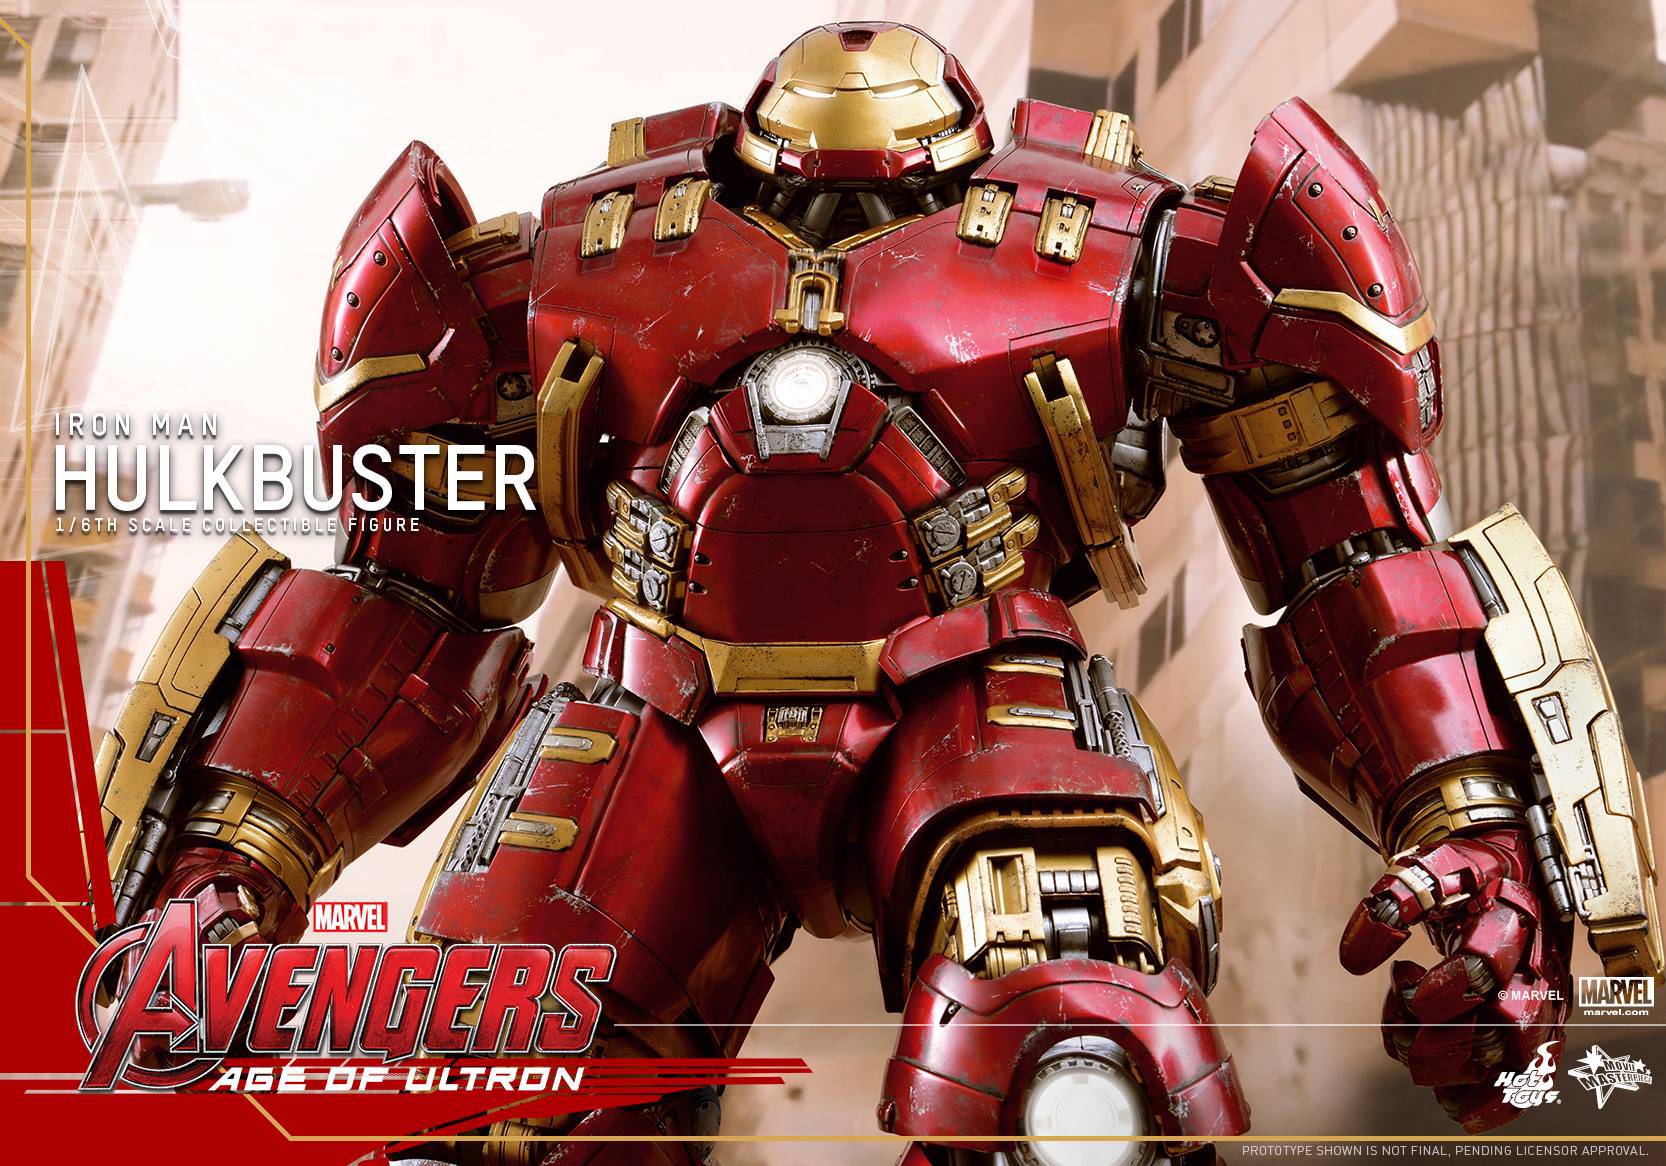 The &;Avengers 2&; Hulkbuster Toy Is A Must Have For Marvel Fans